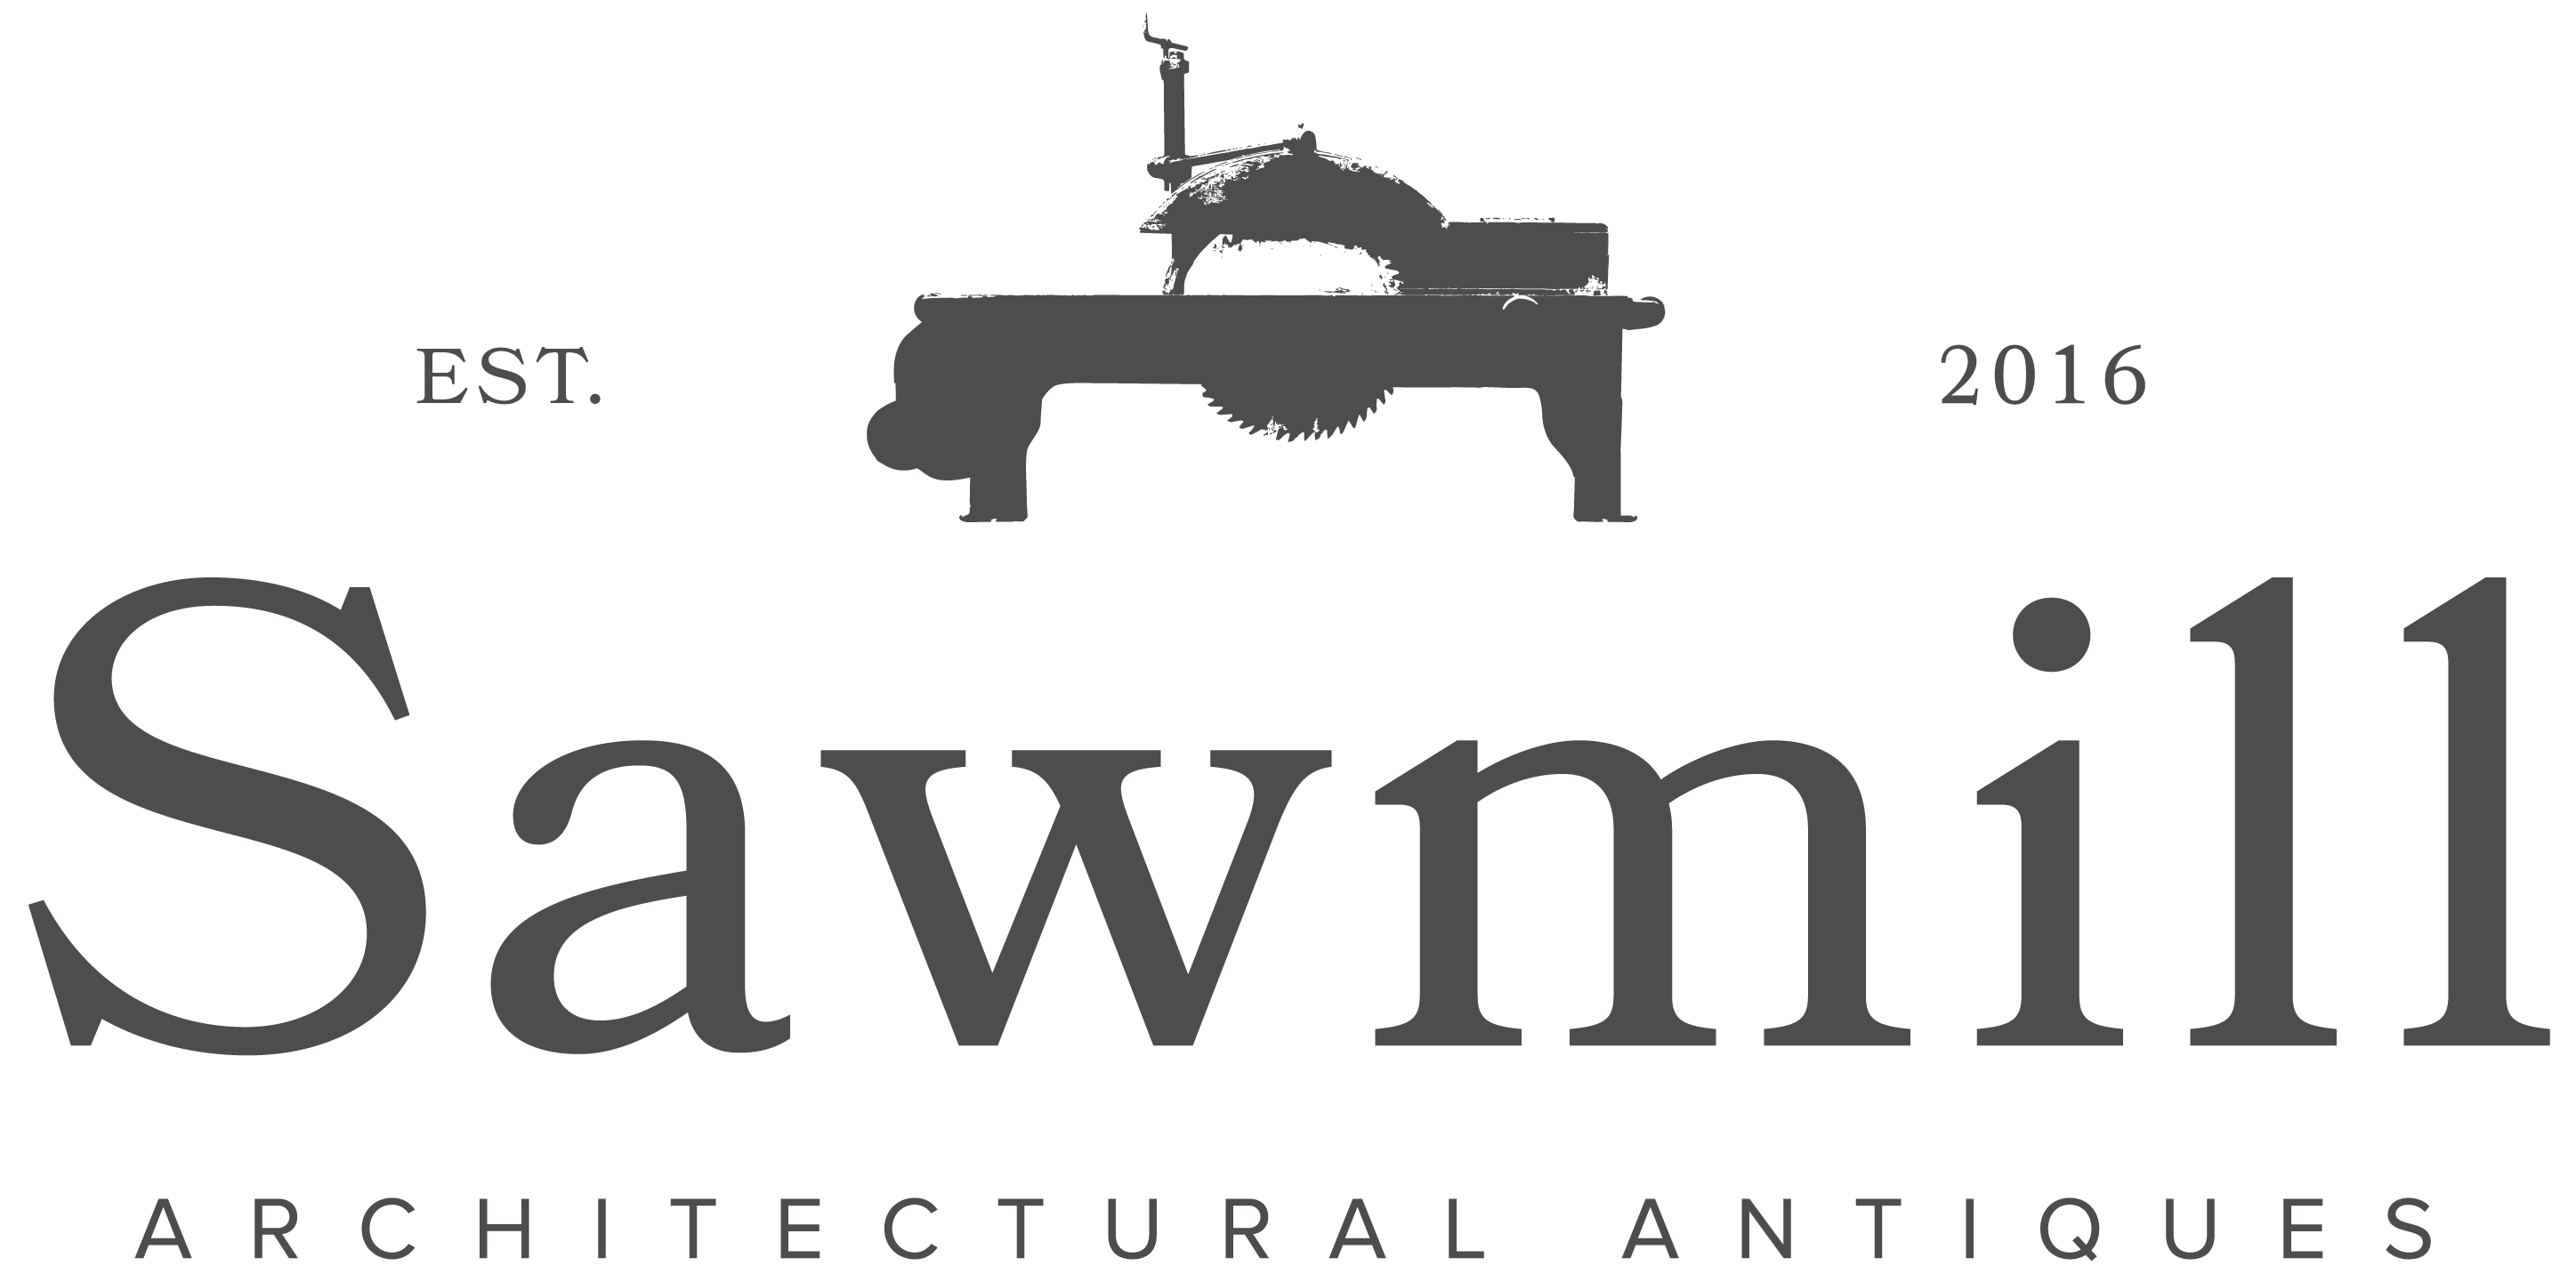 Sawmill Architectural Antiques